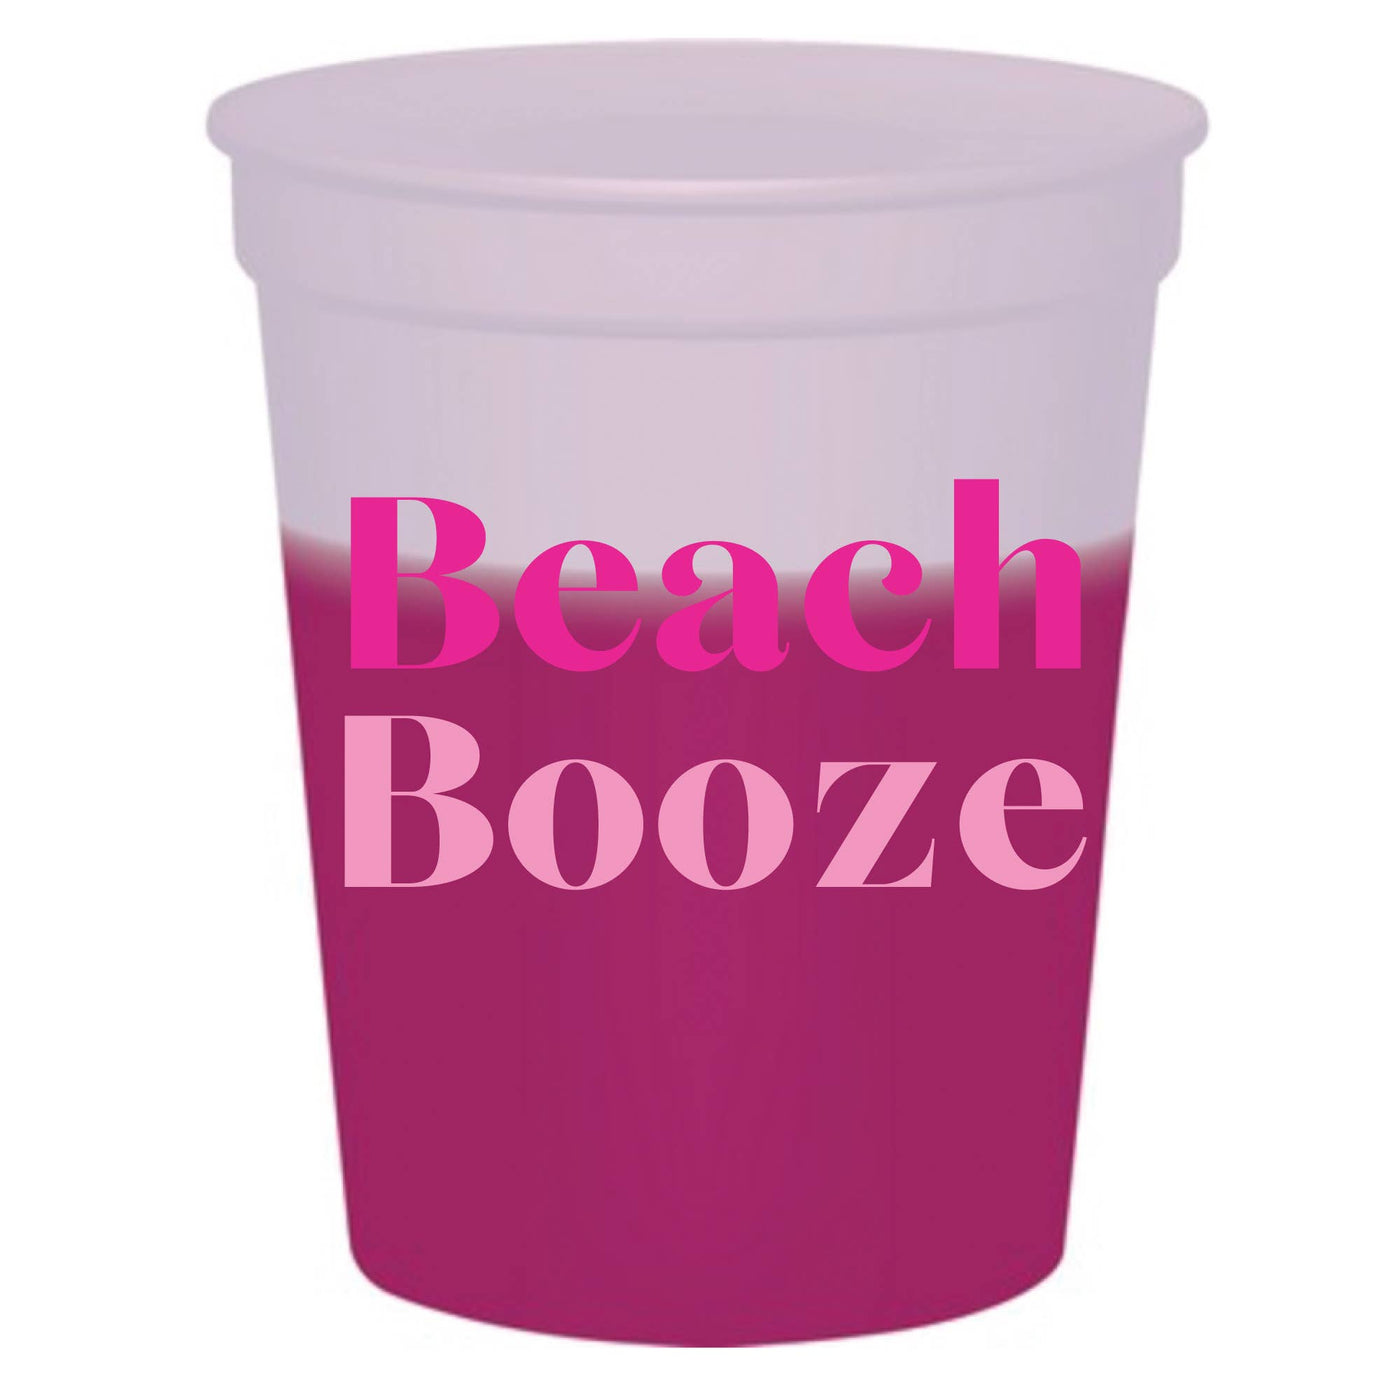 Beach Booze Color Changing Mood Stadium Cups - Summer